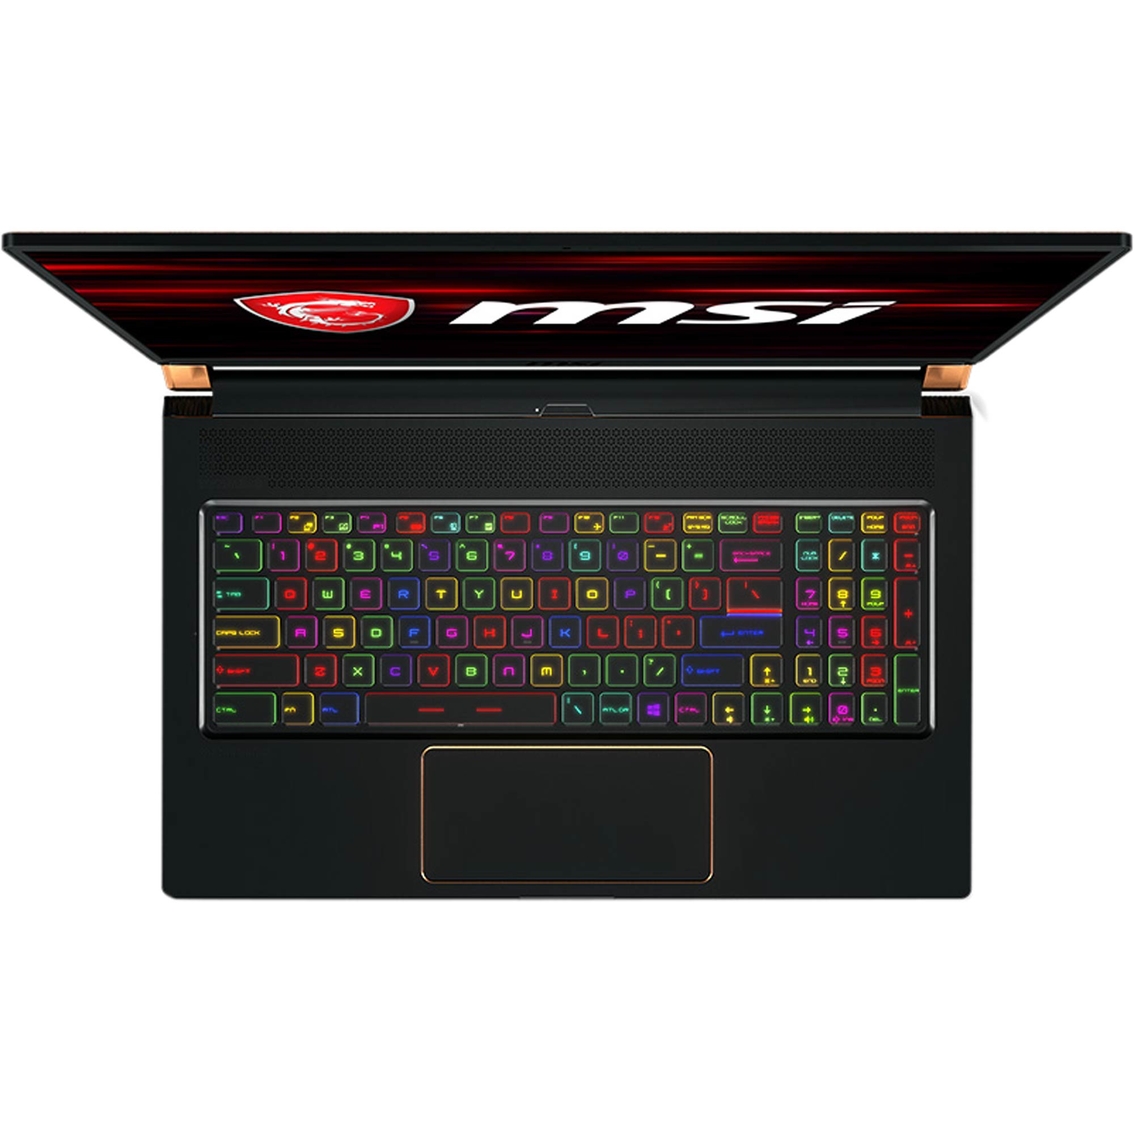 MSI Stealth 17.3 in. Intel Core i7 2.6GHz 32GB RAM 512GB Gaming Notebook - Image 5 of 6